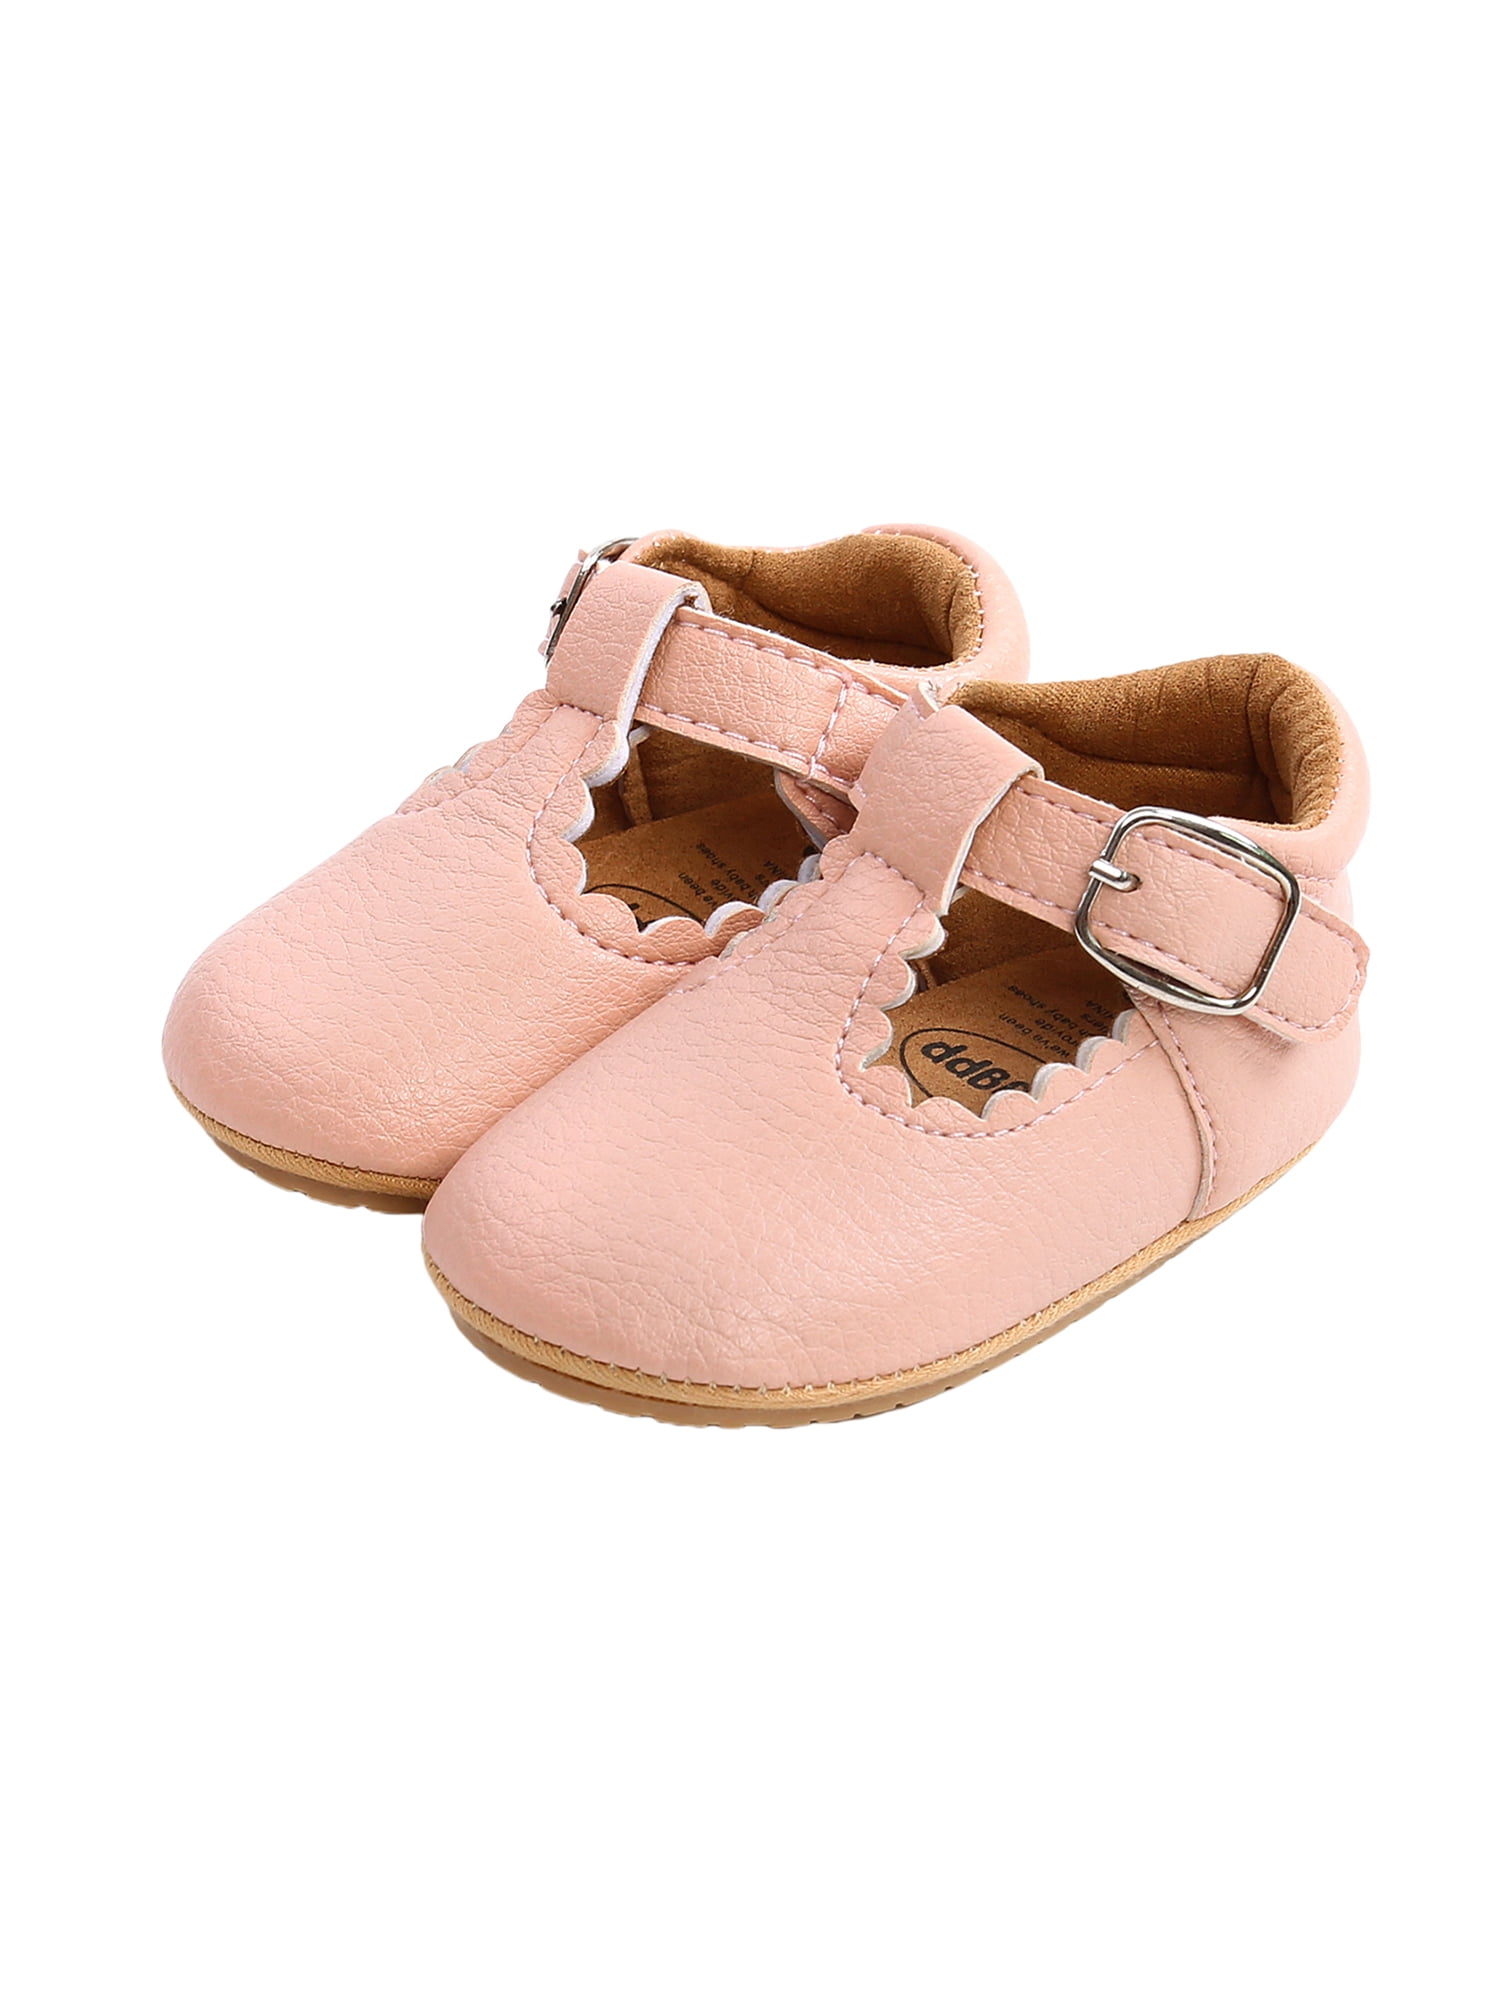 Baby Shower Gift Soft Sole Leather Baby Shoes Infant Toddler MaryjanePink 6-12M 